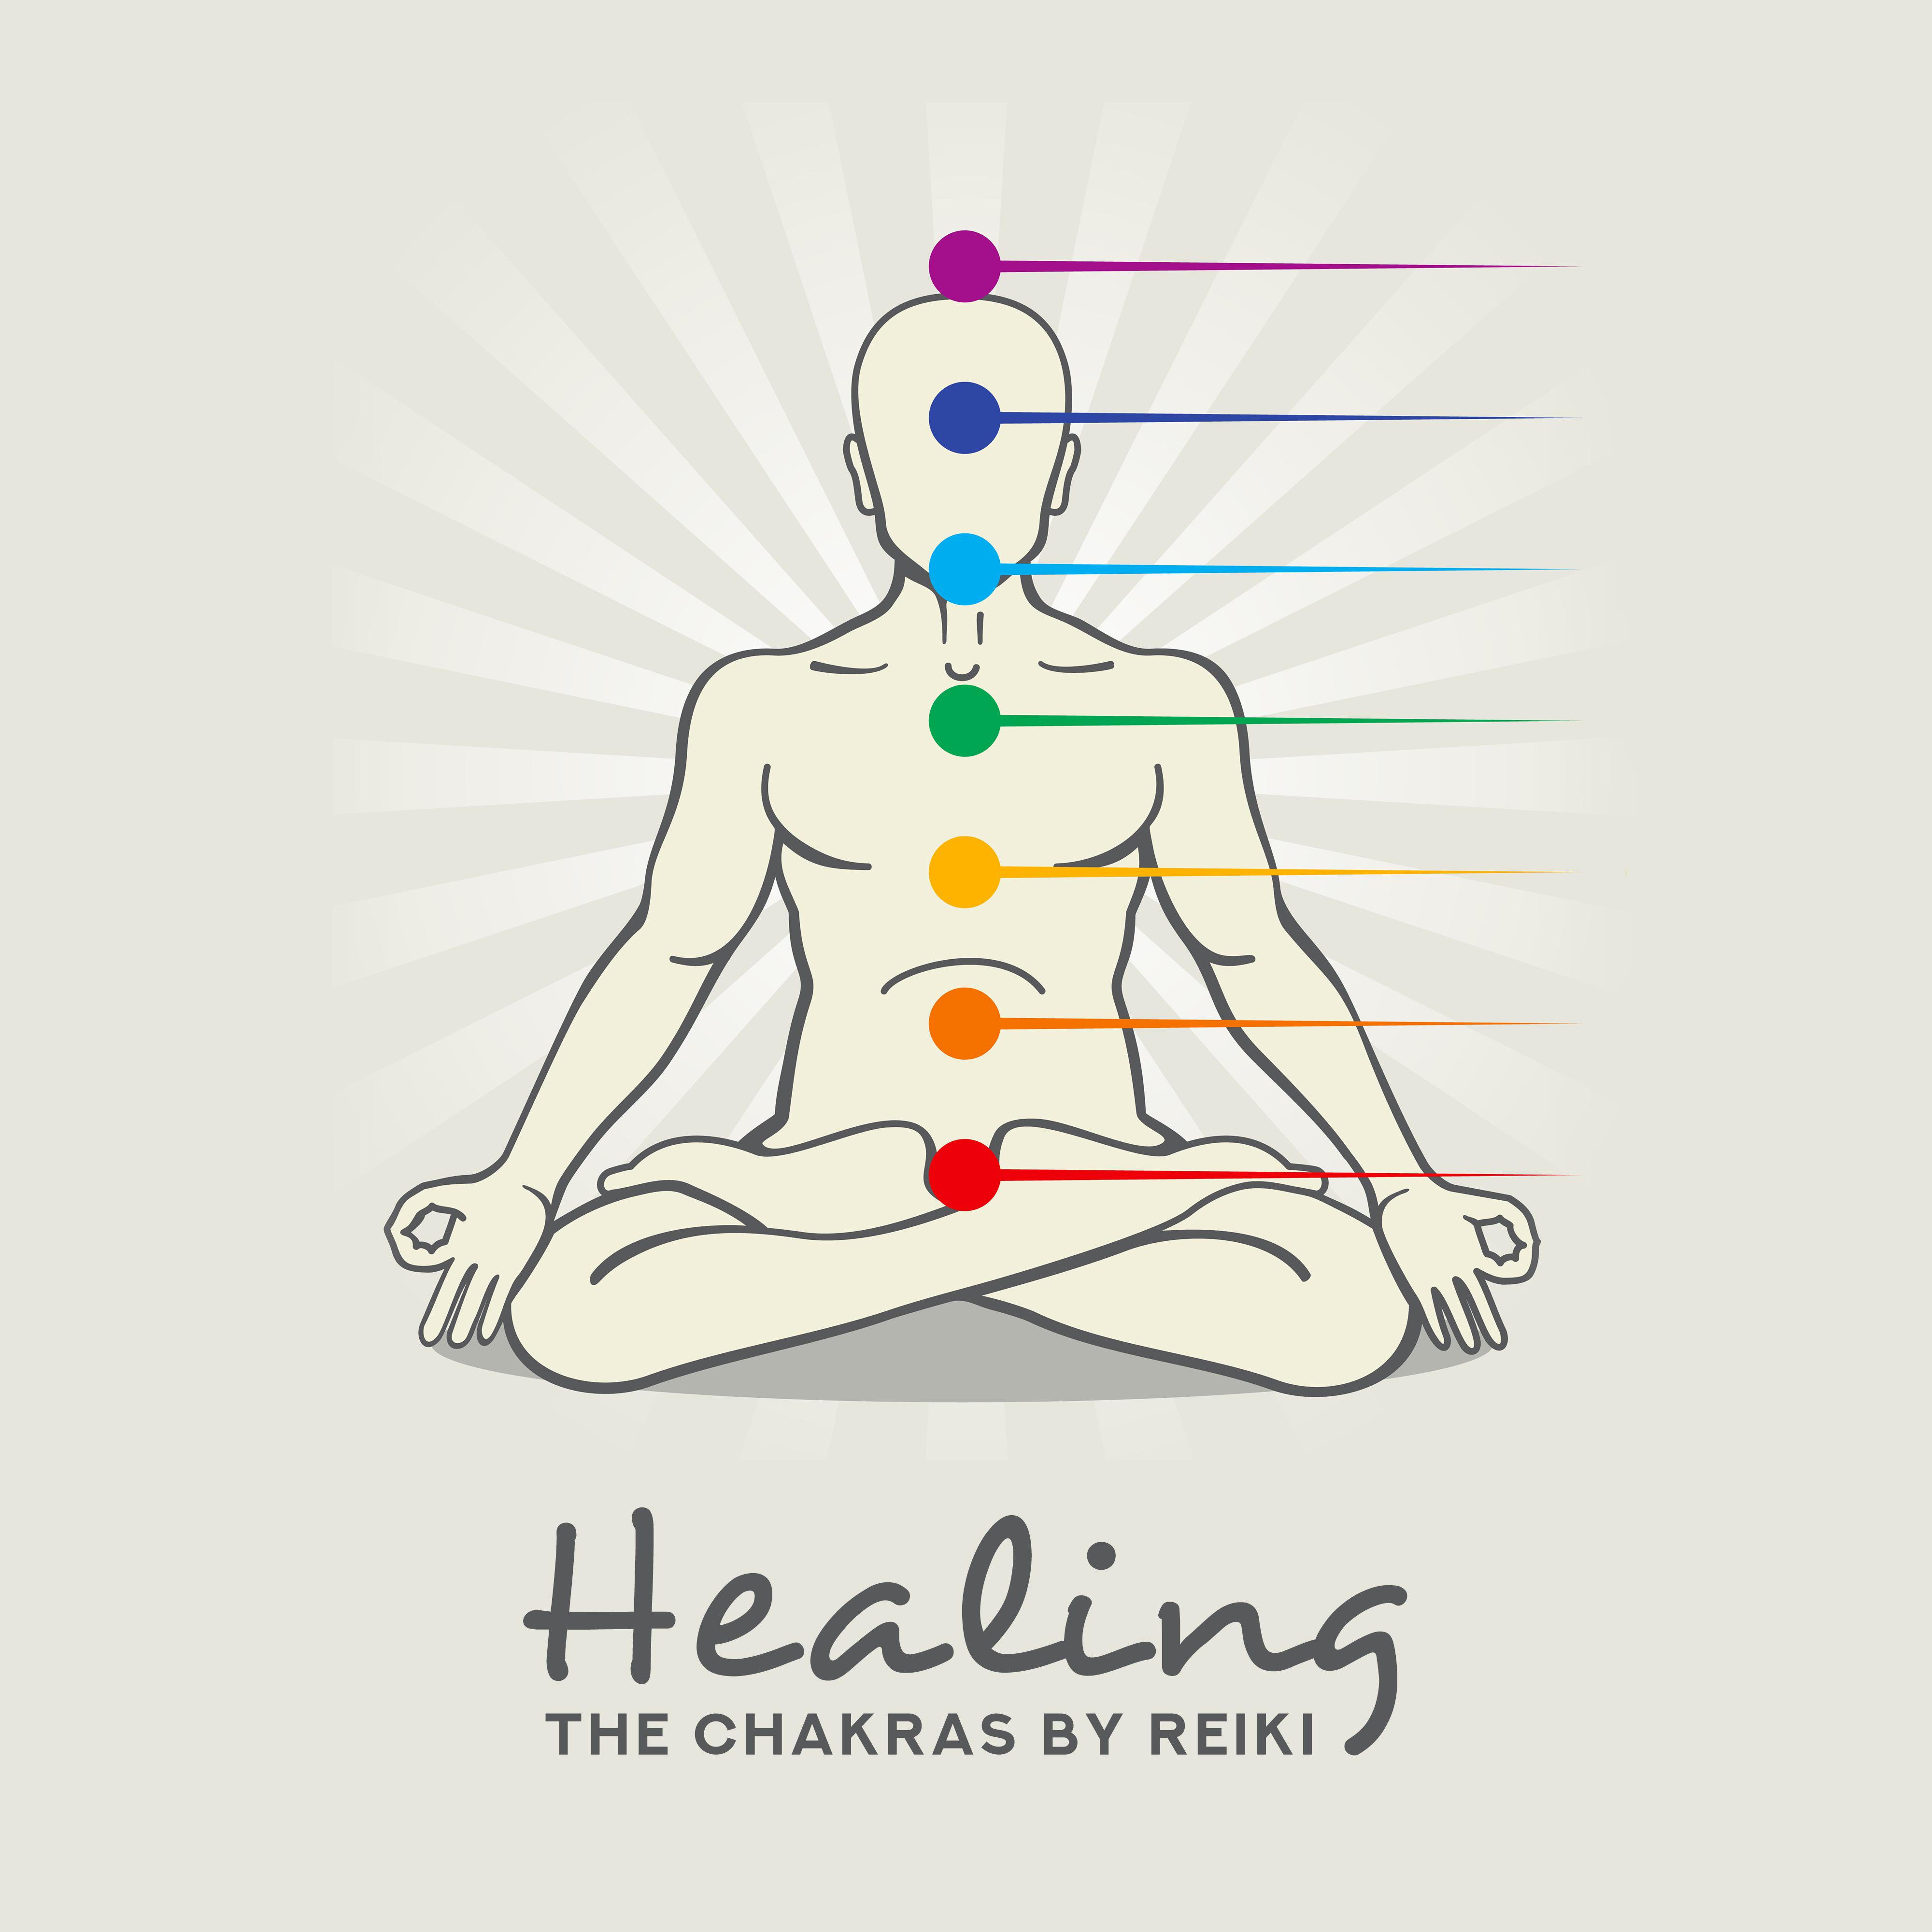 Healing the Chakras by Reiki - Music for Meditation, Balancing All Seven Chakras, Regaining Inner Harmony and Peace, Health and Vitality